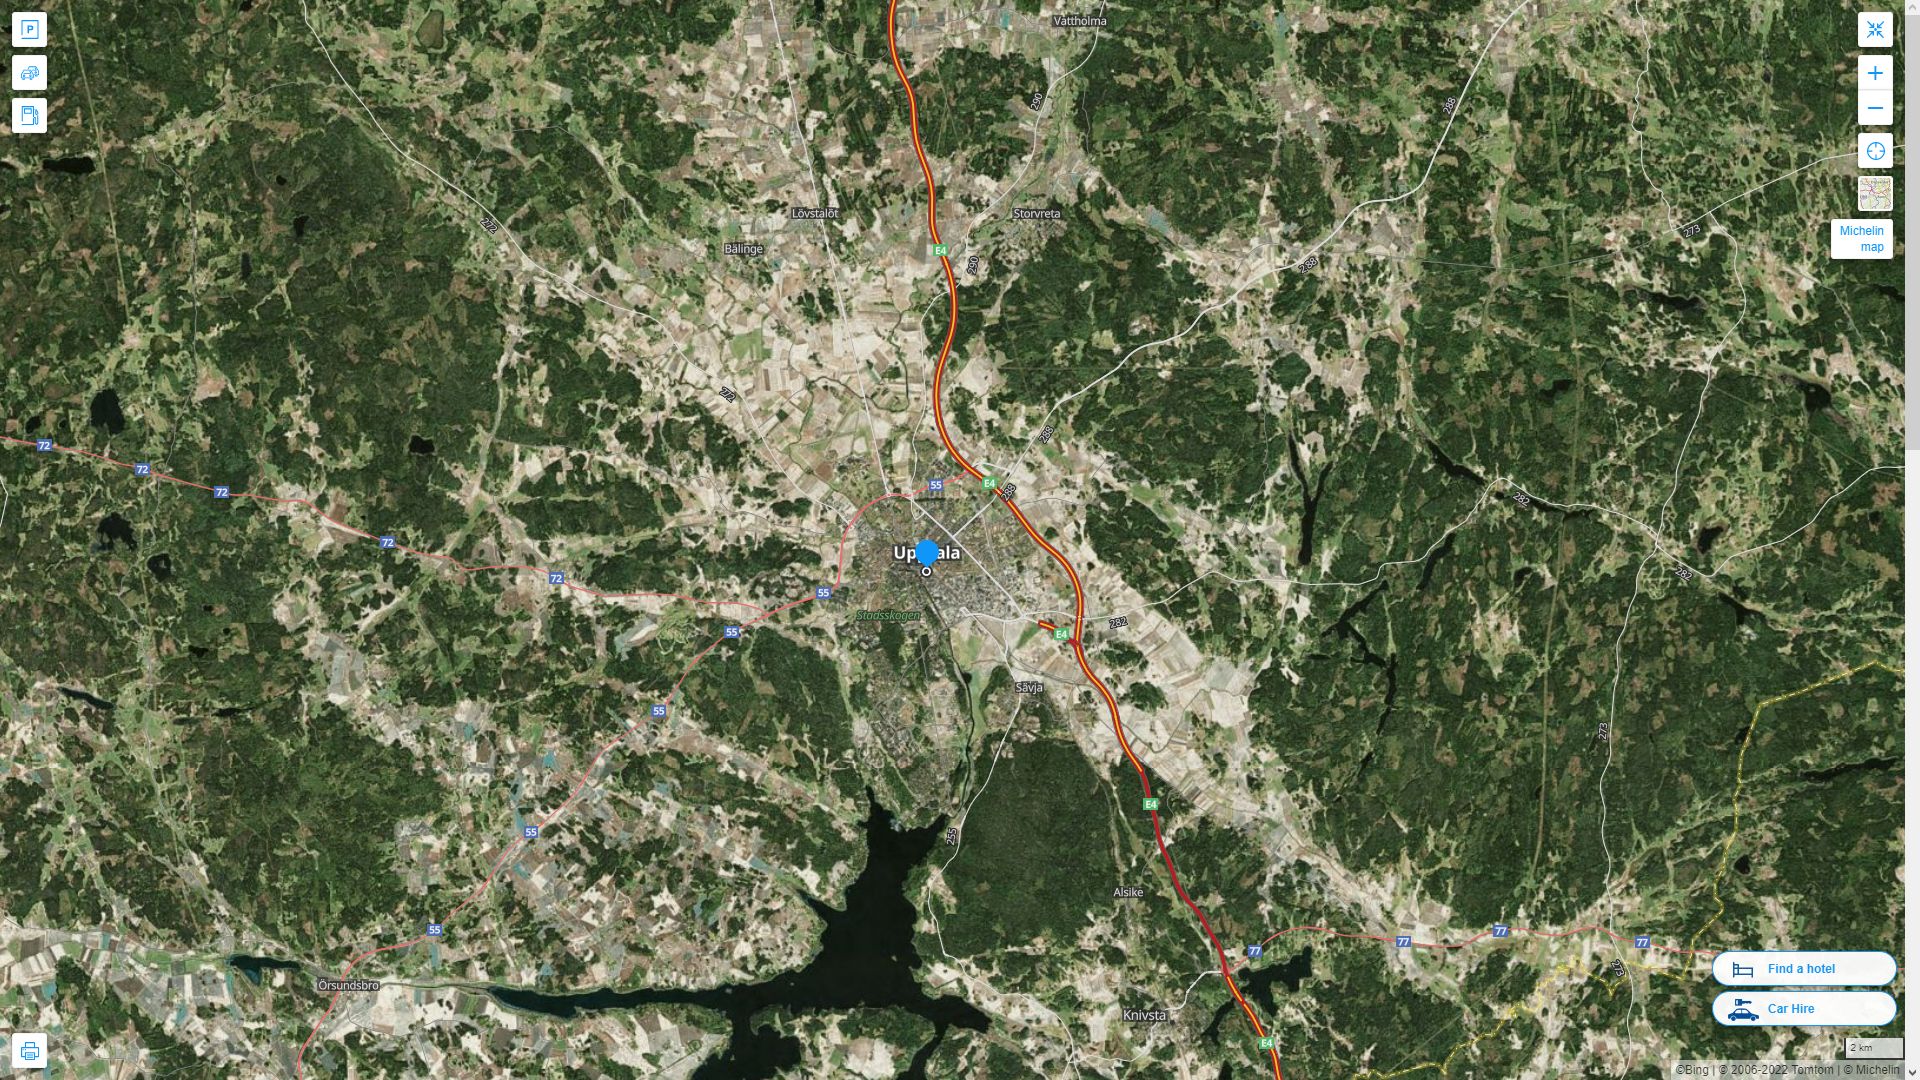 Uppsala Highway and Road Map with Satellite View